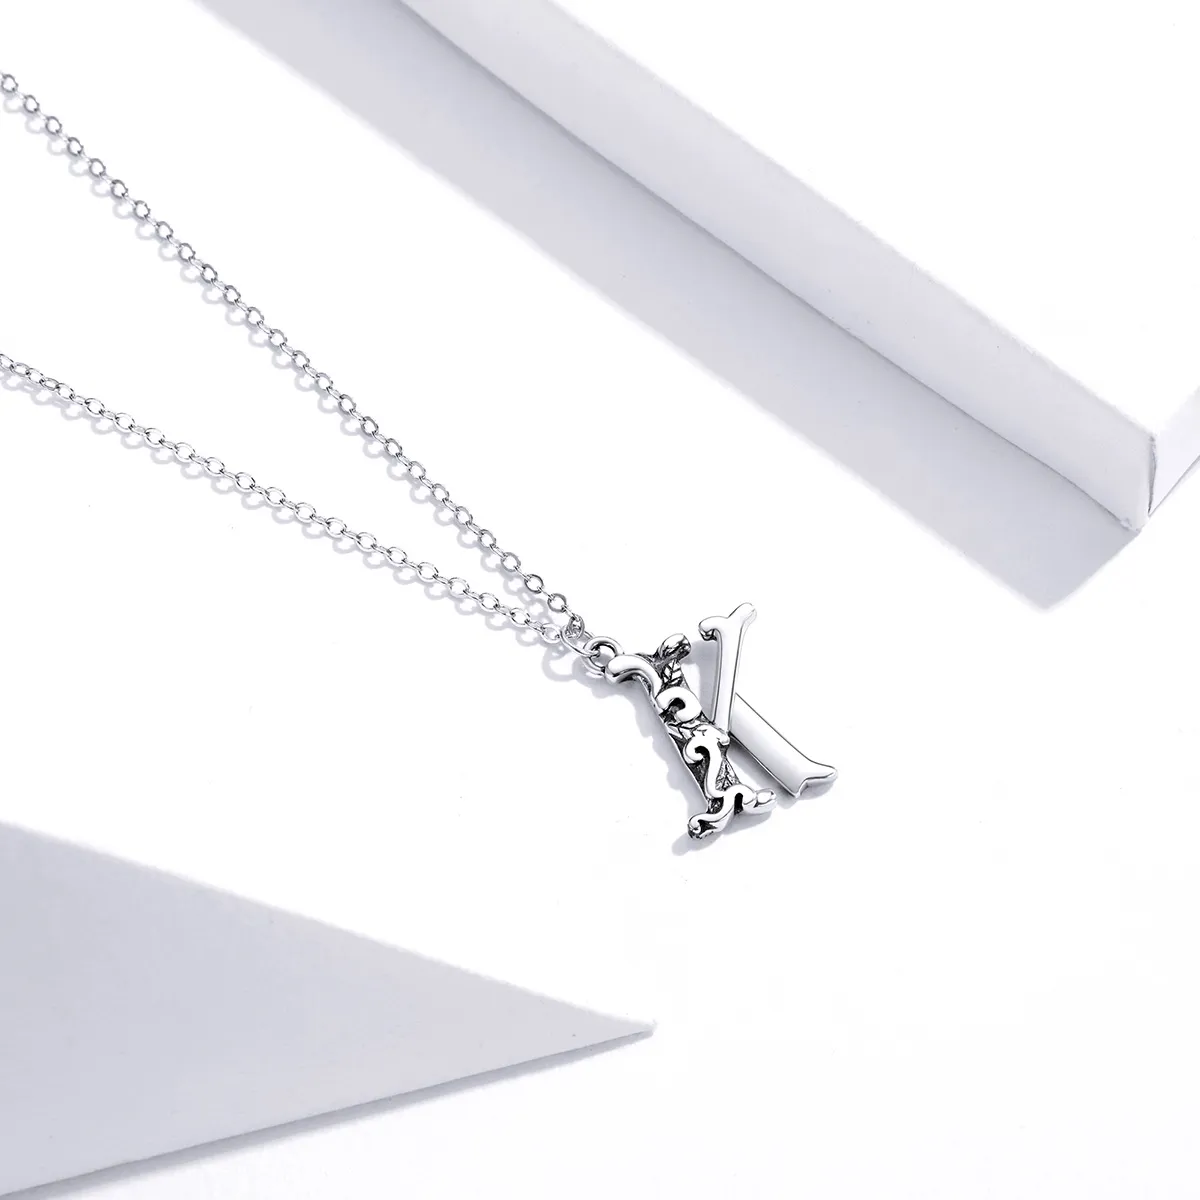 INITIAL NECKLACES - SWAROVSKI EMBOSSED – Olor The Label